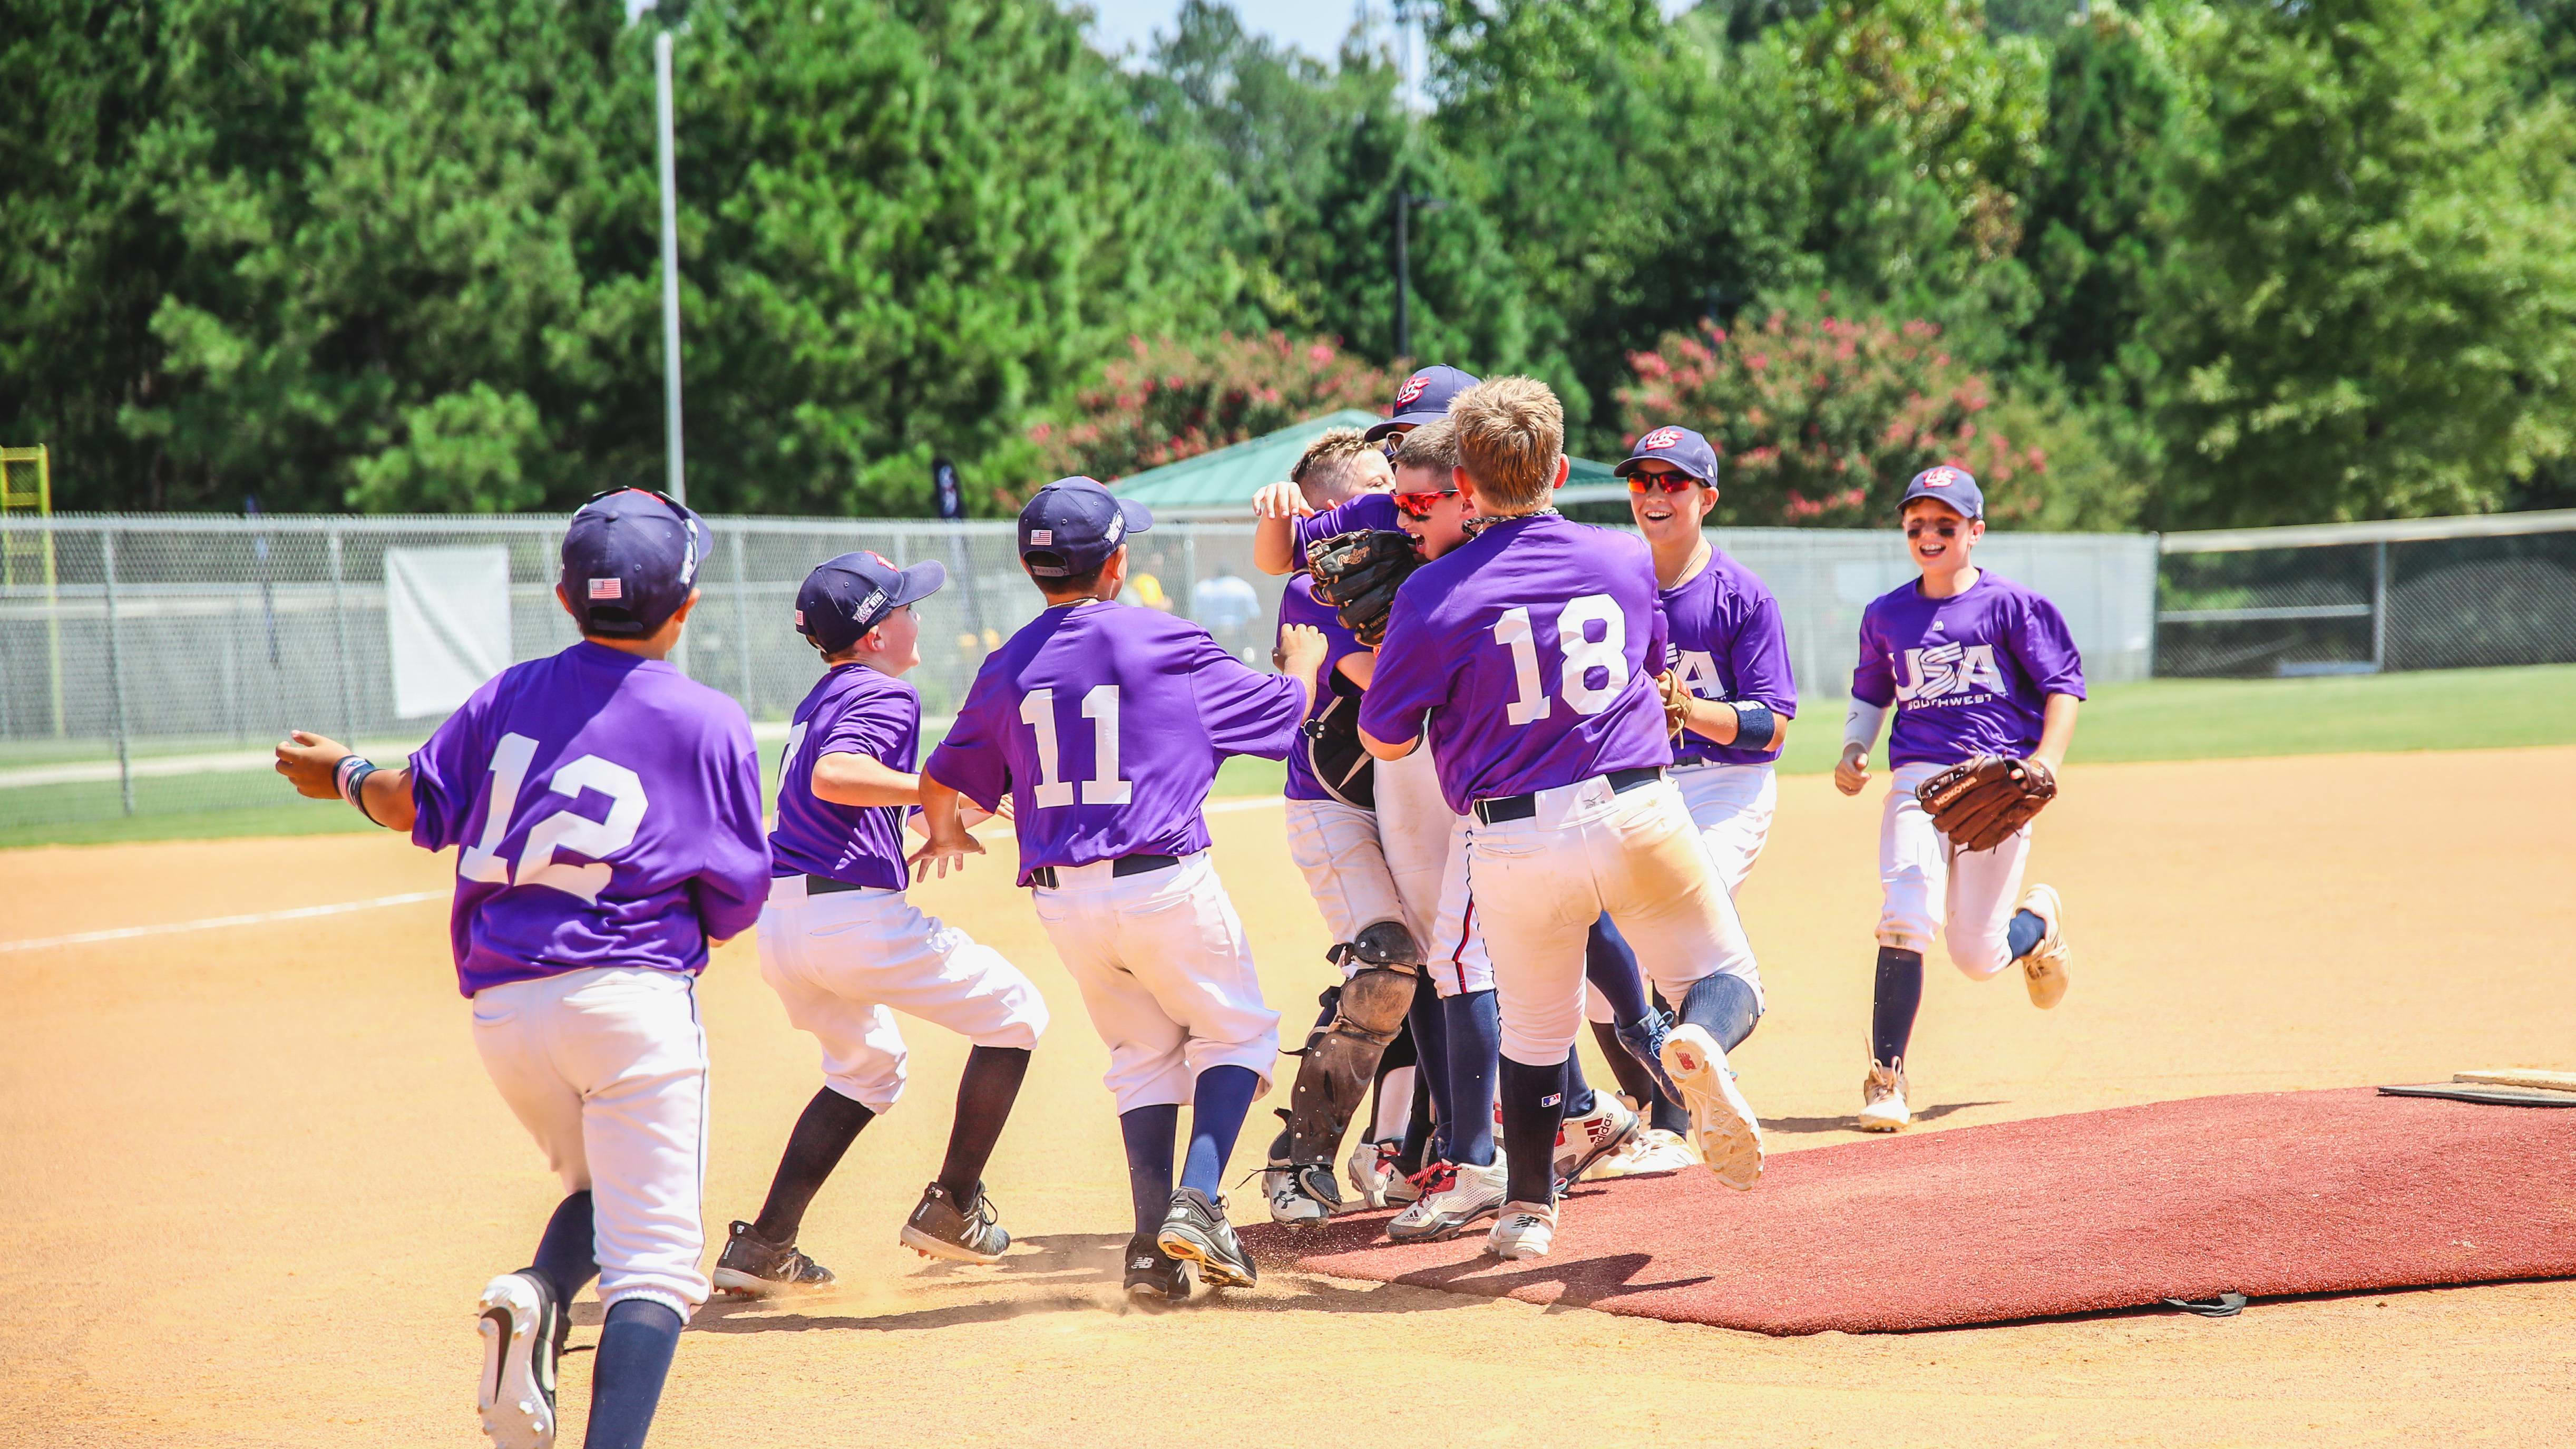 Youth baseball: Bossier 10's All-Stars headed to state tournament after  finishing runner-up in district tourney